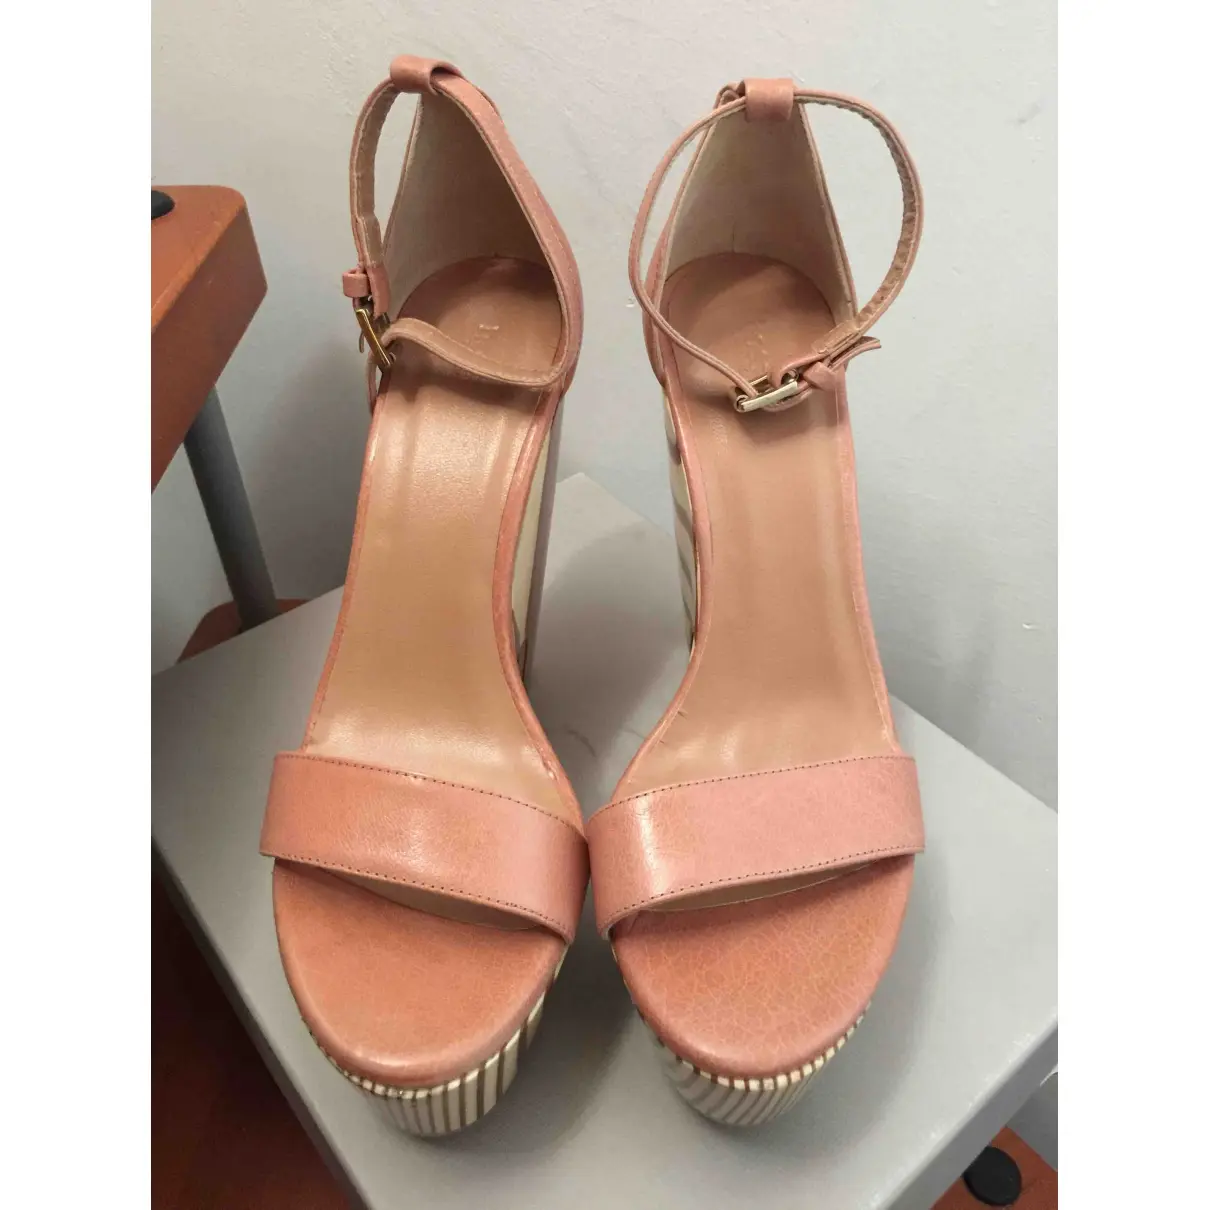 Hoss Intropia Leather sandals for sale